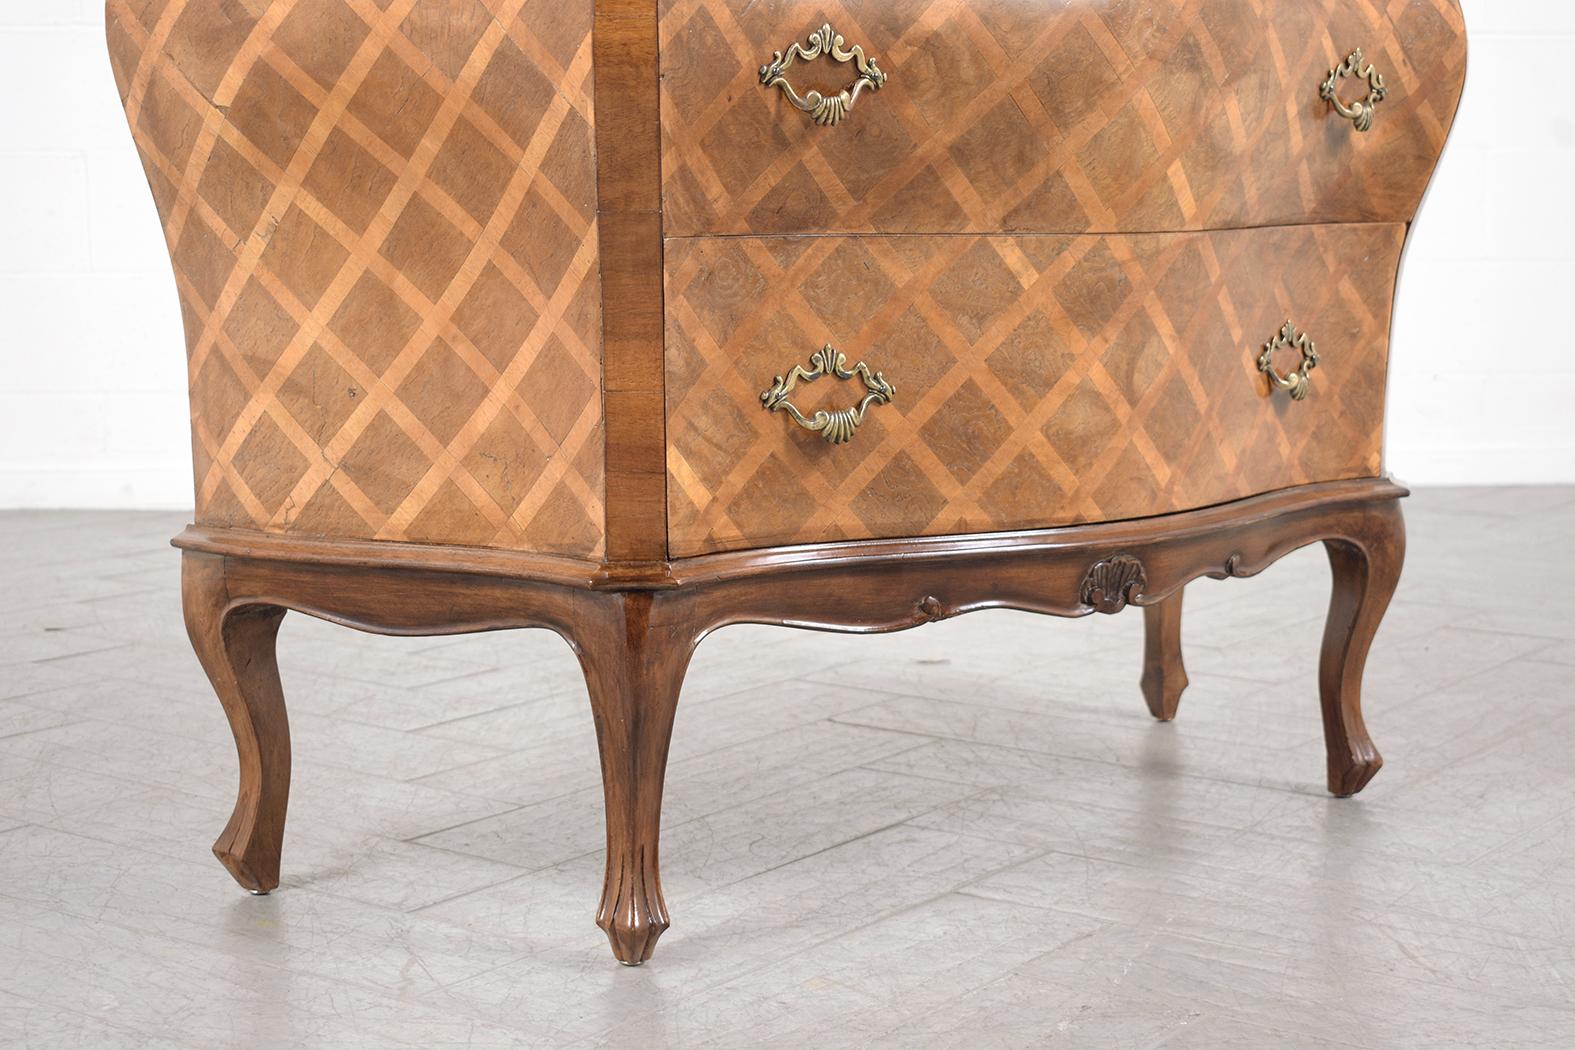 Lacquer Italian Vintage Commode: Restored Wood and Marquetry Veneer Bombay Chest